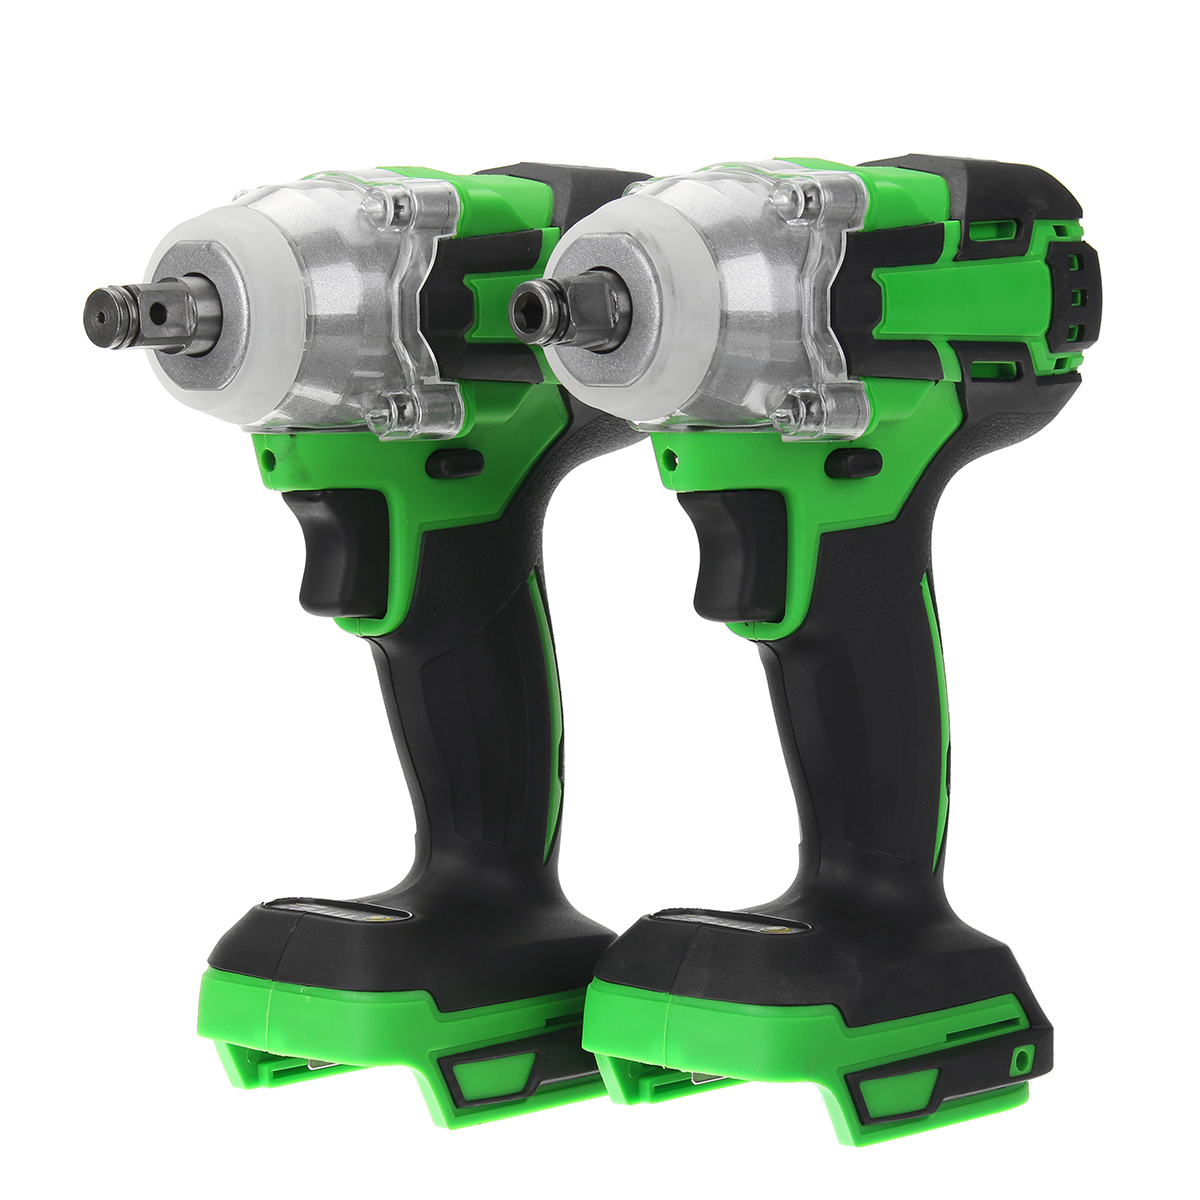 520NM-Torque-Brushless-Impact-Wrench-Screwdriver-Cordless-Rechargable-Electric-Wrench-Driver-Tool-St-1610036-6